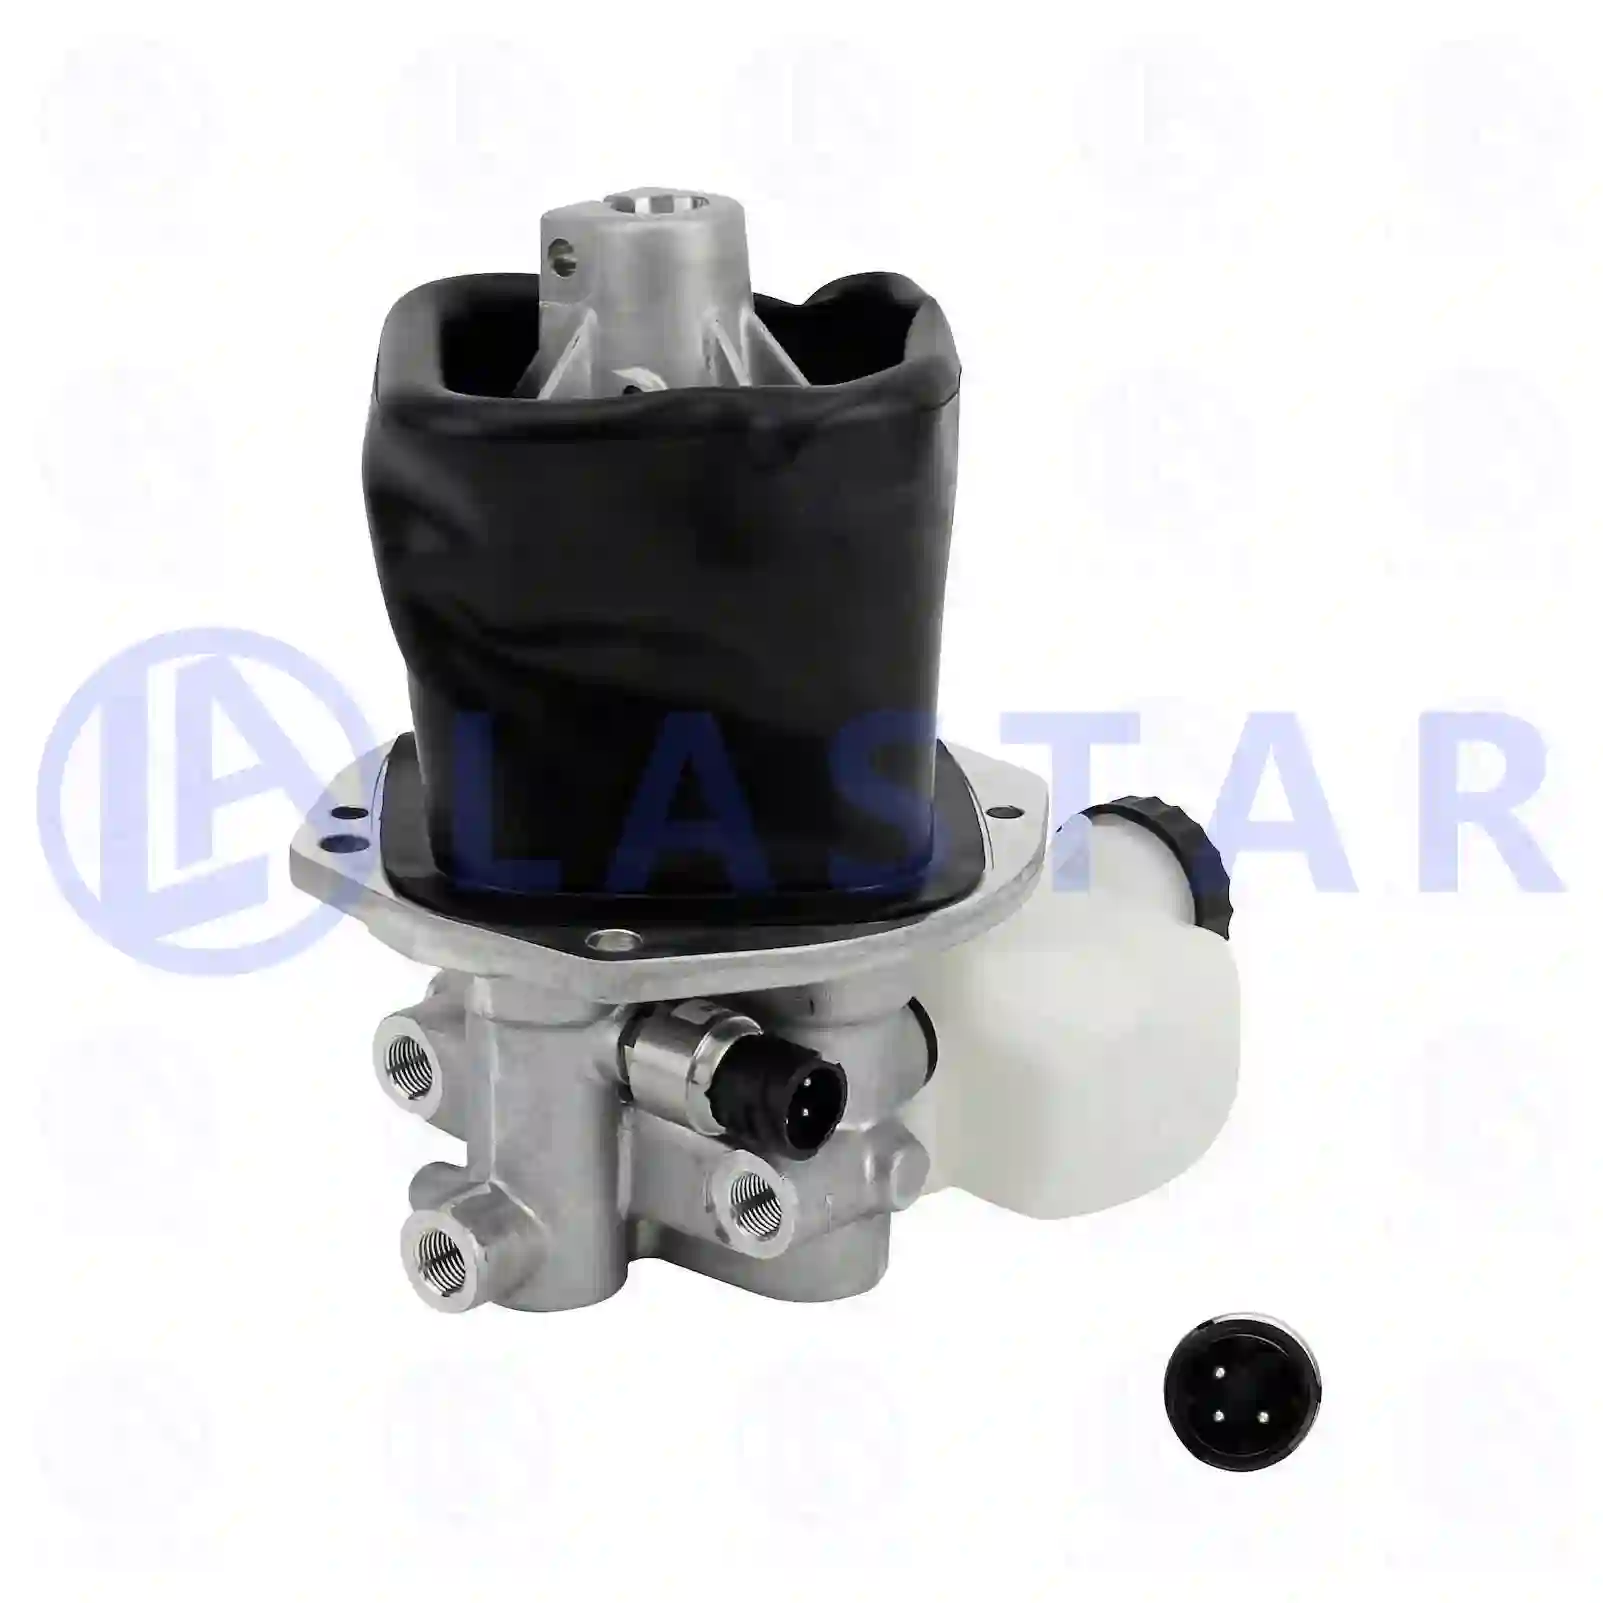 Switching device, gear shift lever, 77732795, 0002604298, 0002607398, 0002607798 ||  77732795 Lastar Spare Part | Truck Spare Parts, Auotomotive Spare Parts Switching device, gear shift lever, 77732795, 0002604298, 0002607398, 0002607798 ||  77732795 Lastar Spare Part | Truck Spare Parts, Auotomotive Spare Parts